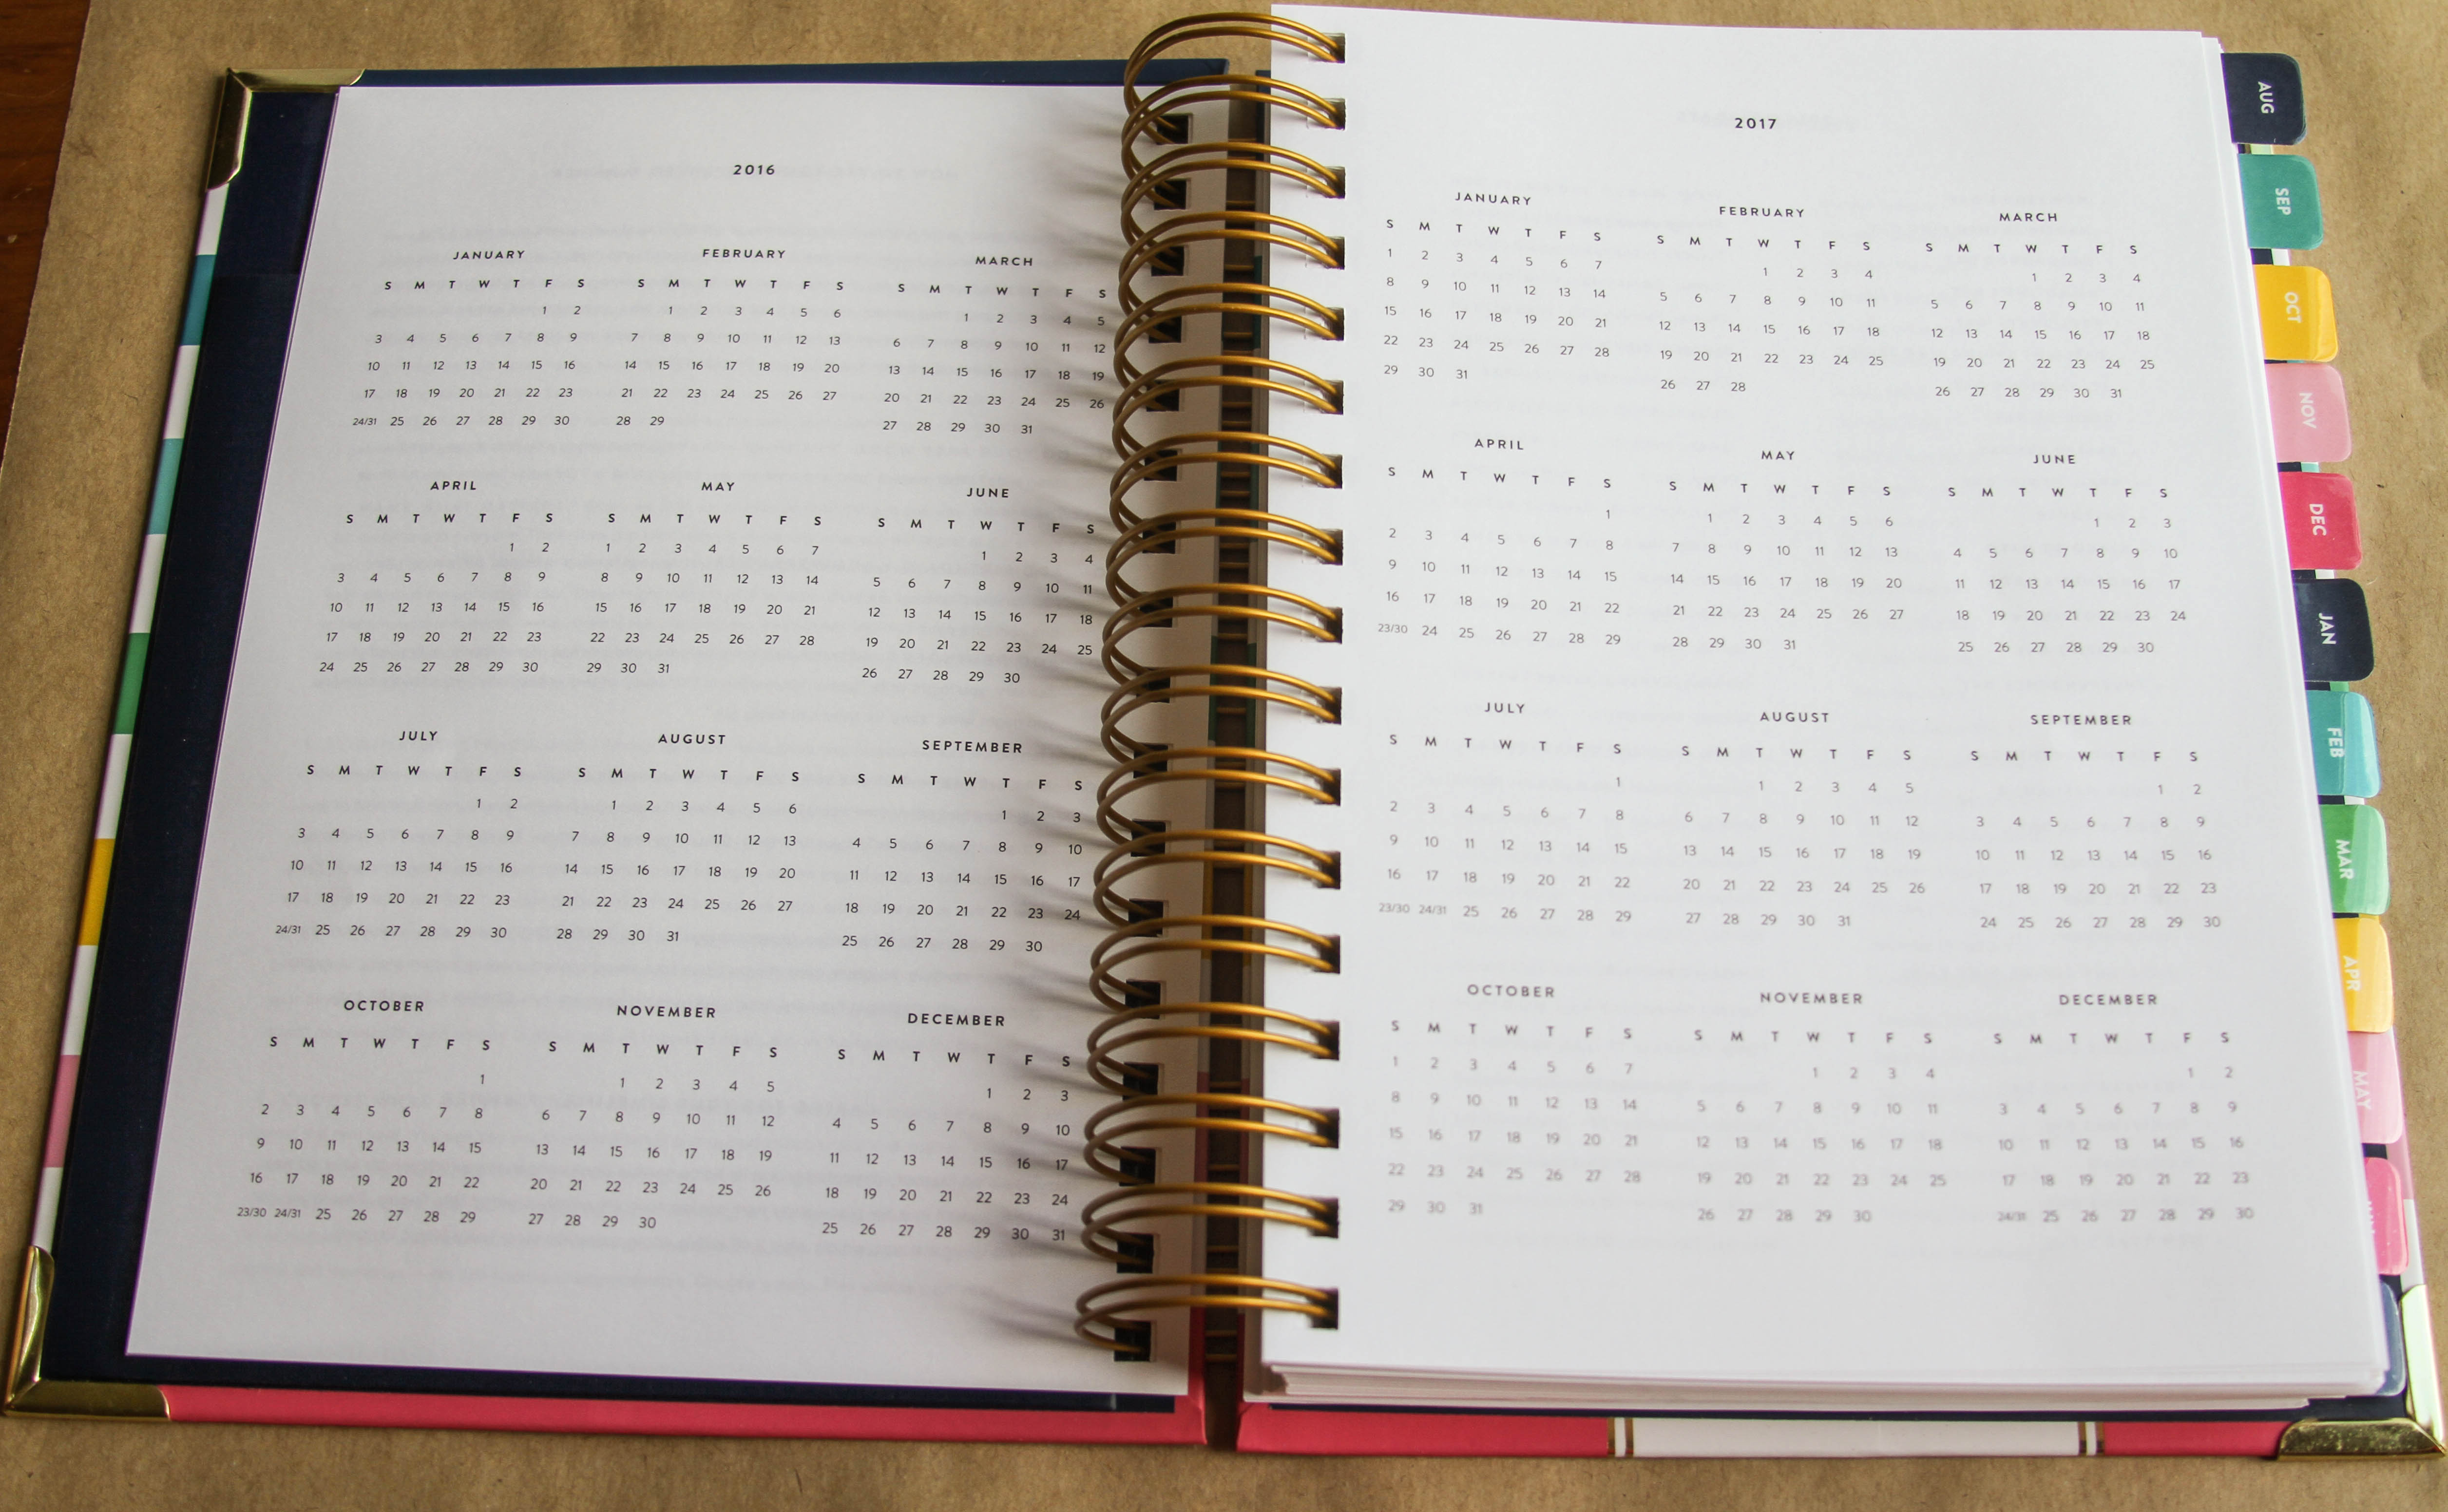 The Simplified Planner